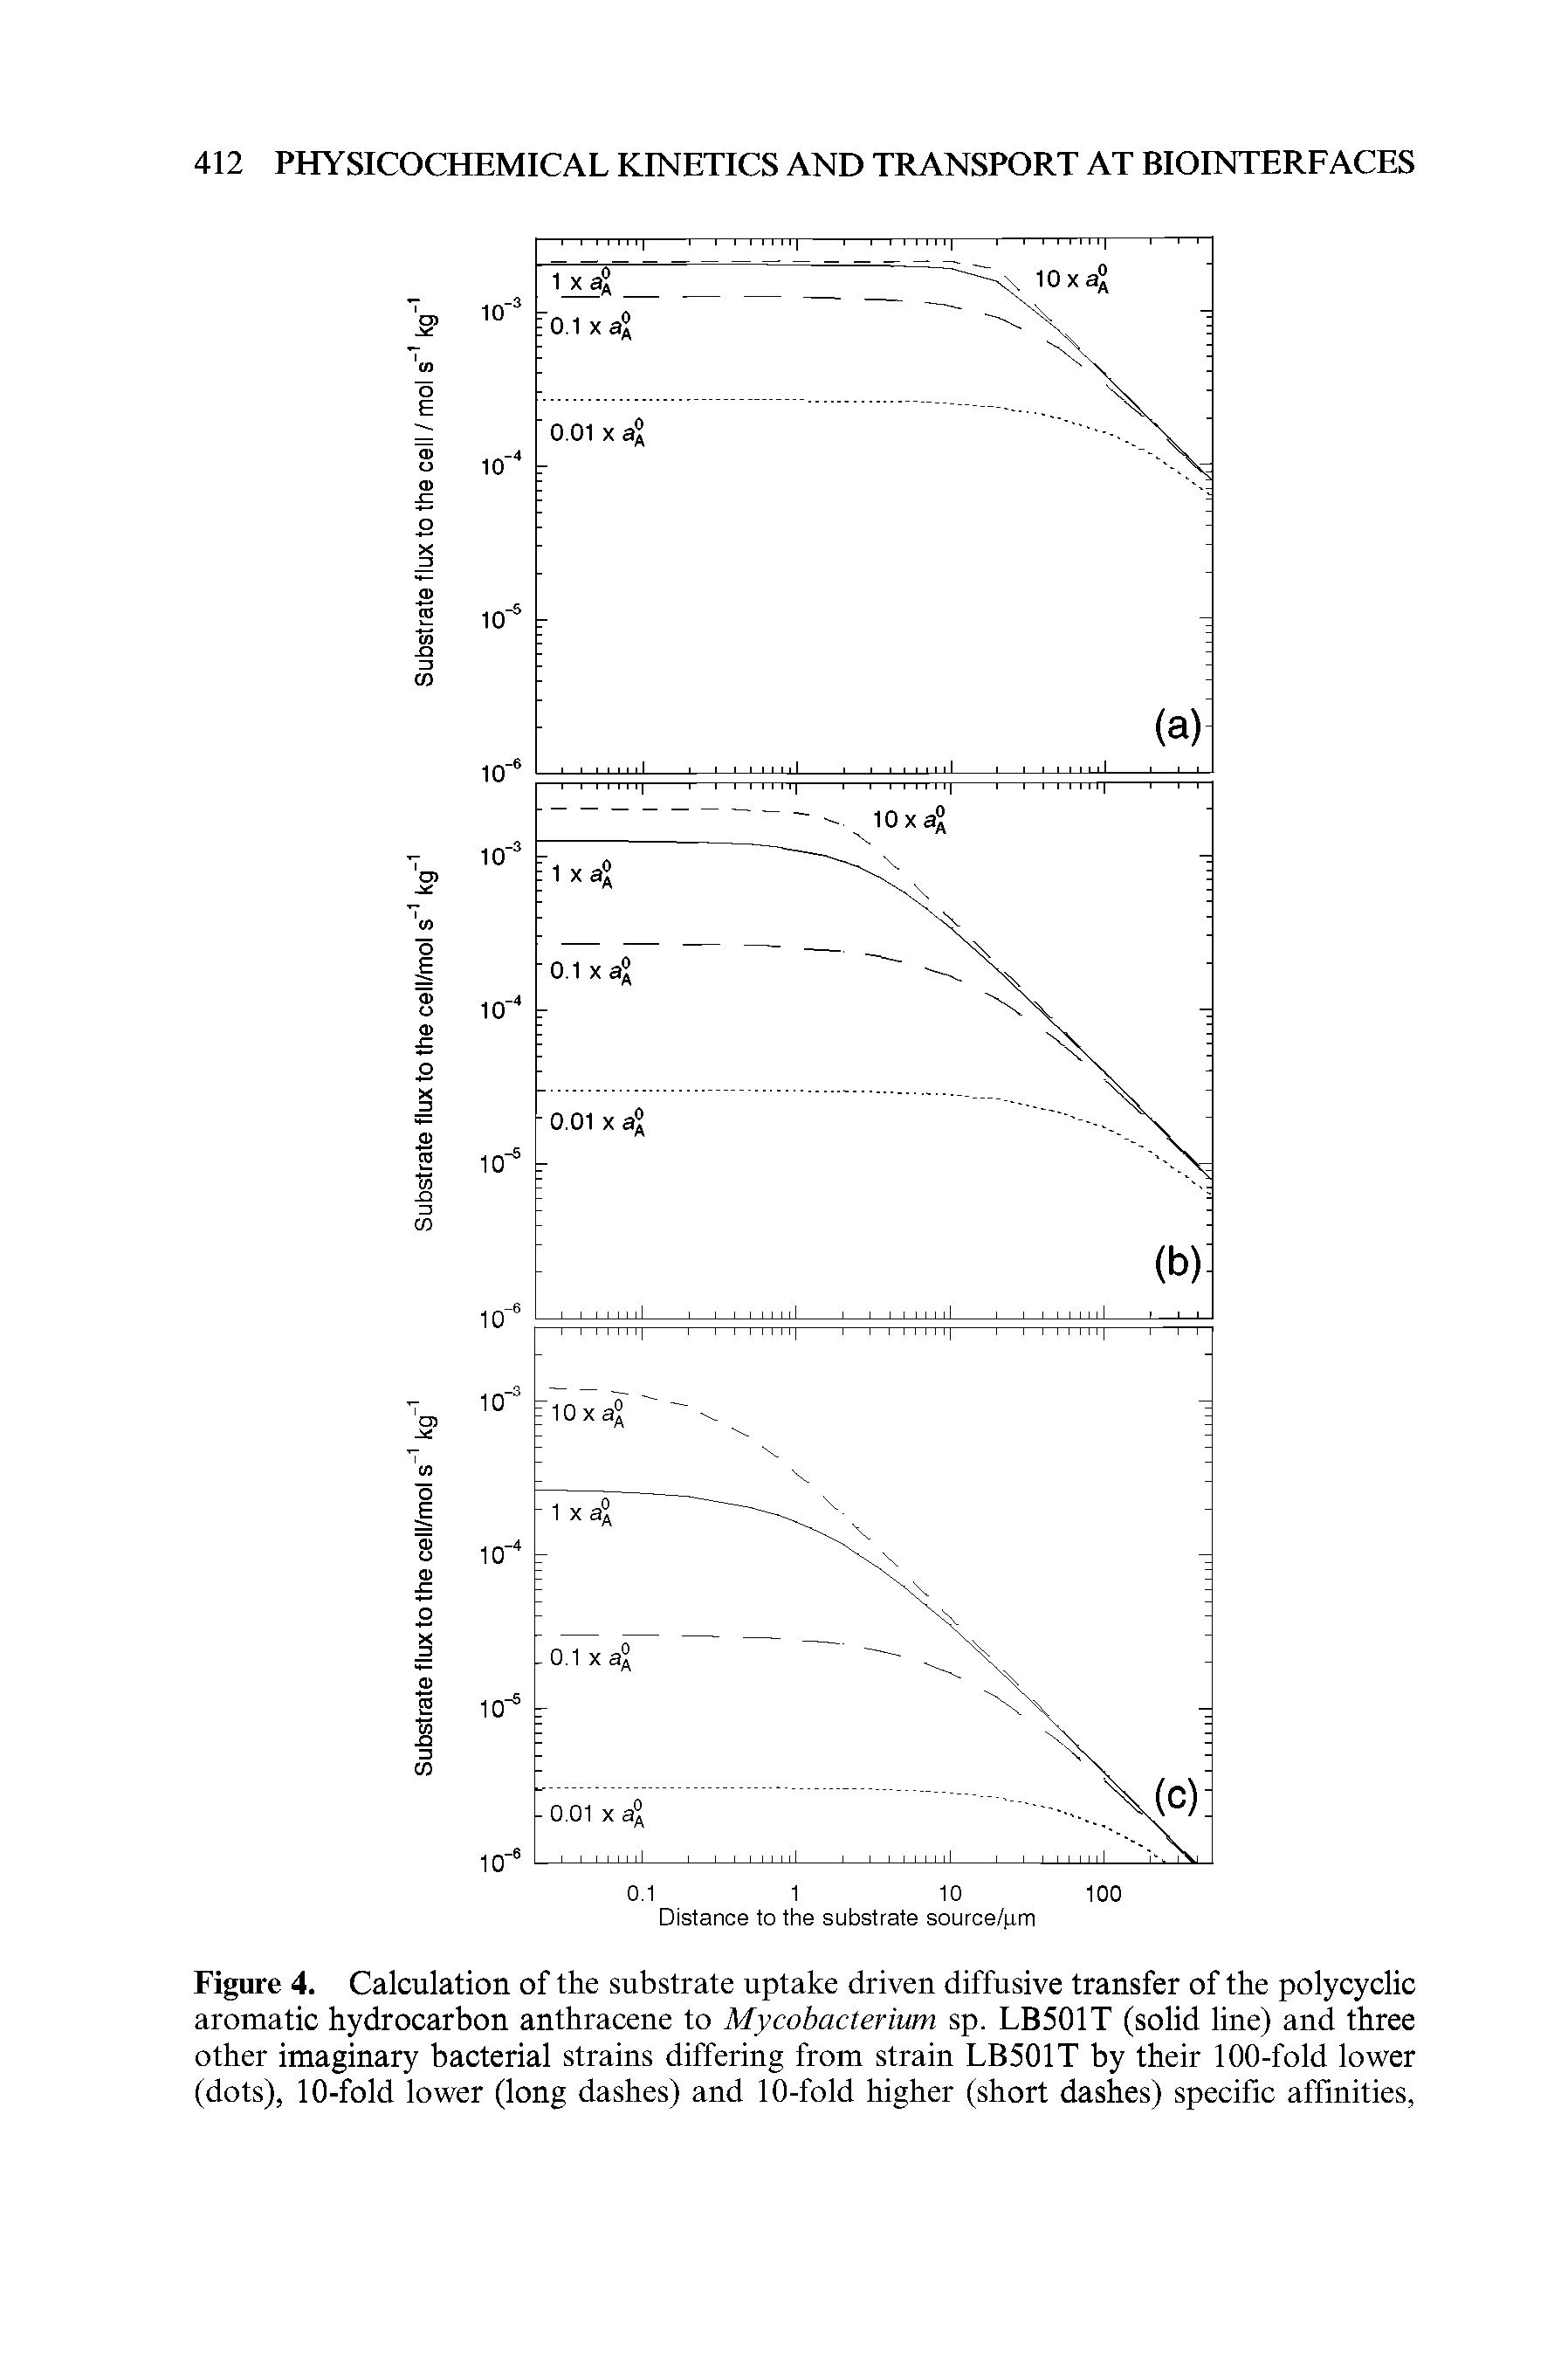 Figure 4. Calculation of the substrate uptake driven diffusive transfer of the polycyclic aromatic hydrocarbon anthracene to Mycobacterium sp. LB501T (solid line) and three other imaginary bacterial strains differing from strain LB501T by their 100-fold lower (dots), 10-fold lower (long dashes) and 10-fold higher (short dashes) specific affinities,...